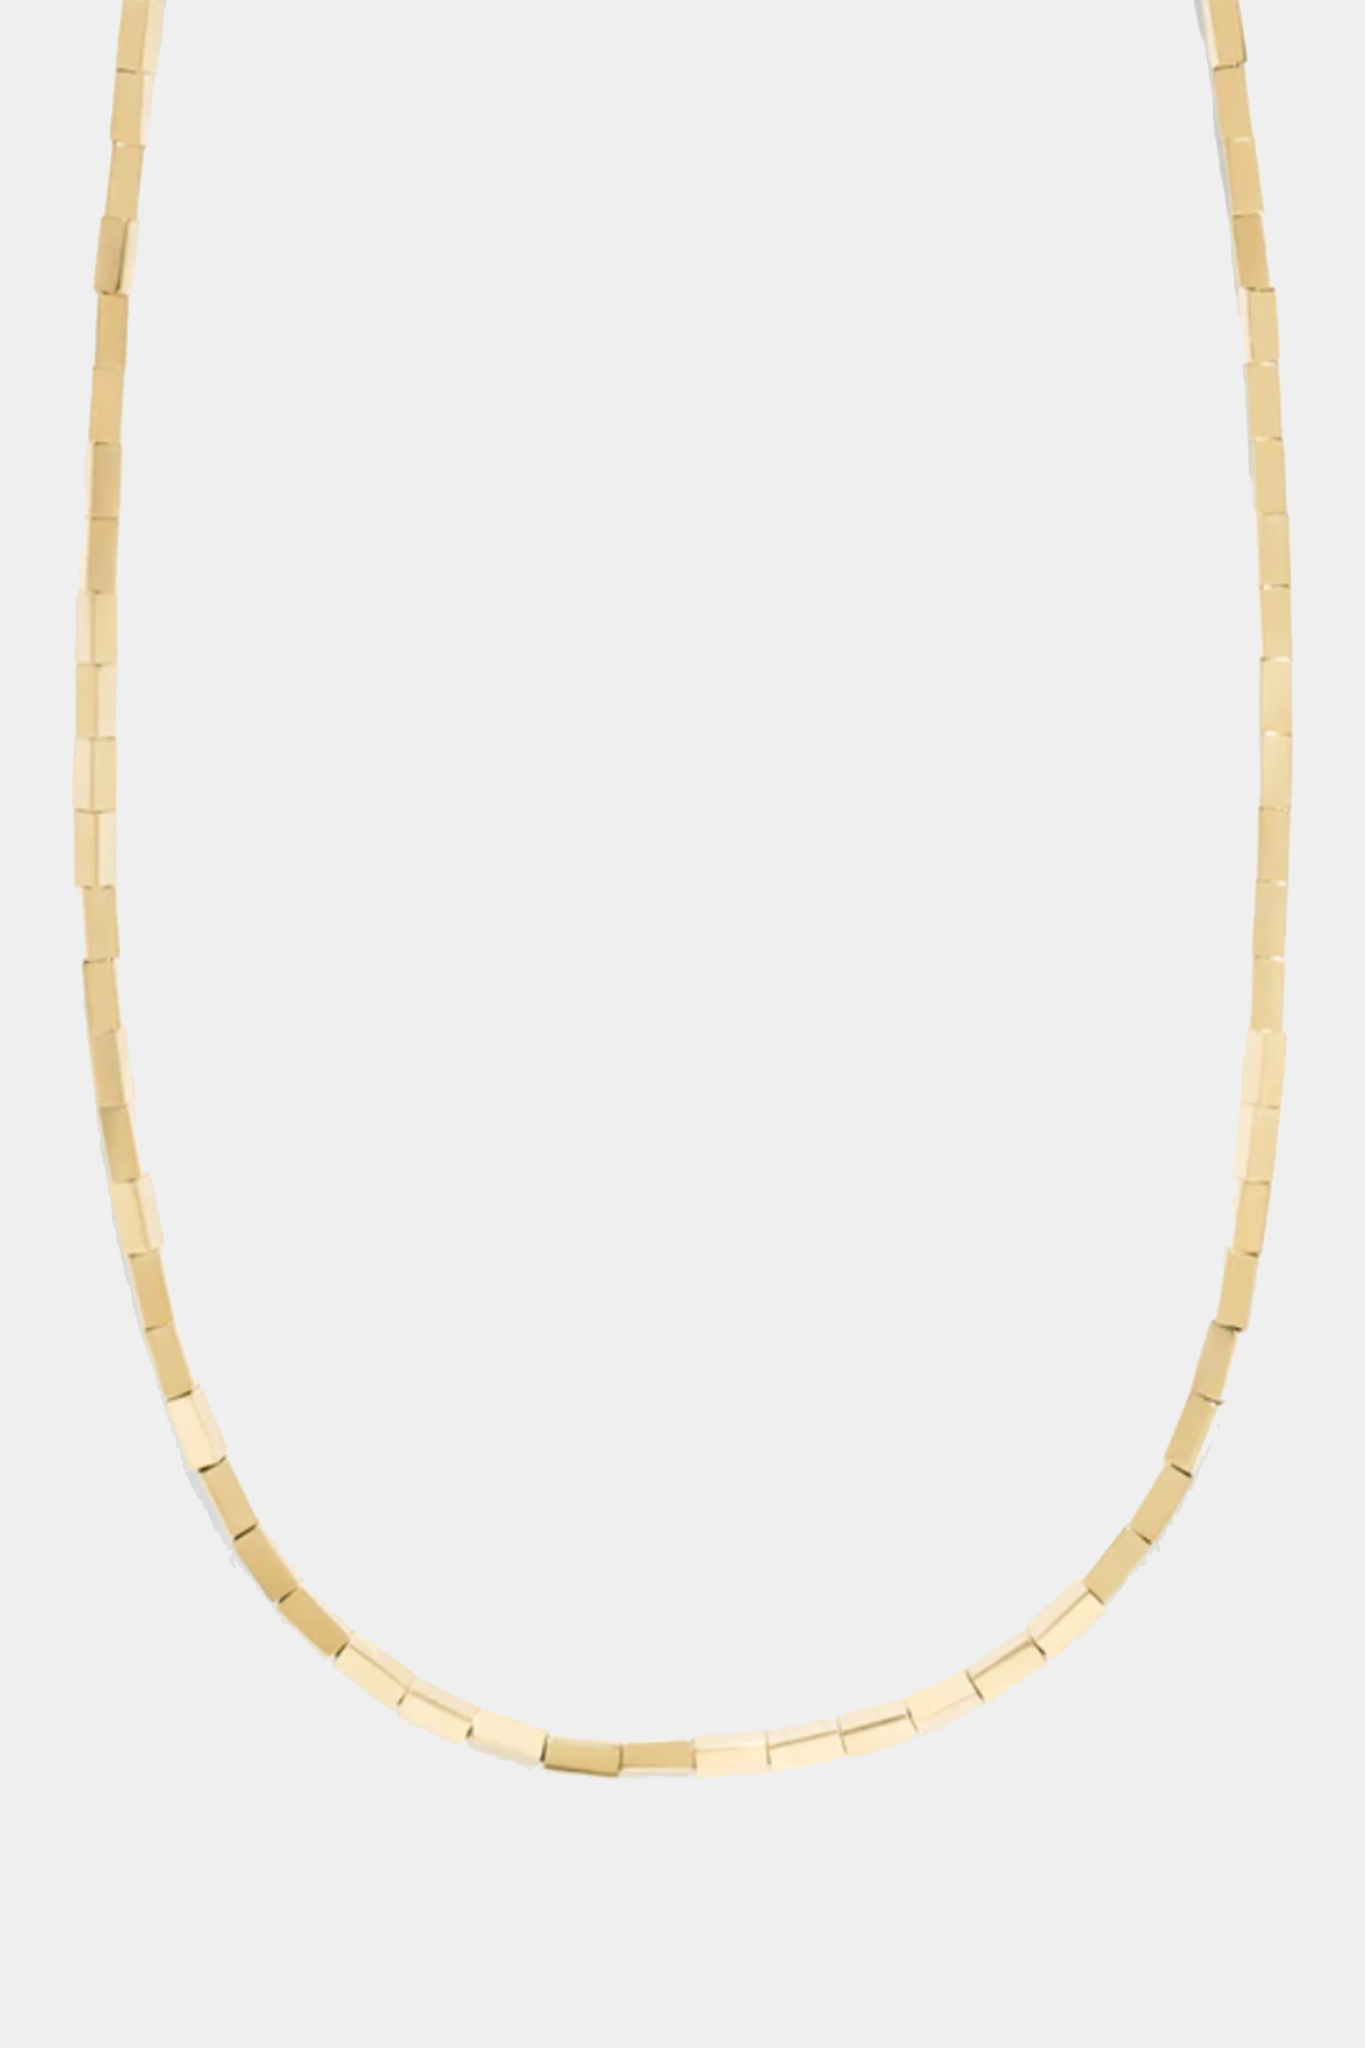 AZLEE - small gold bar necklace